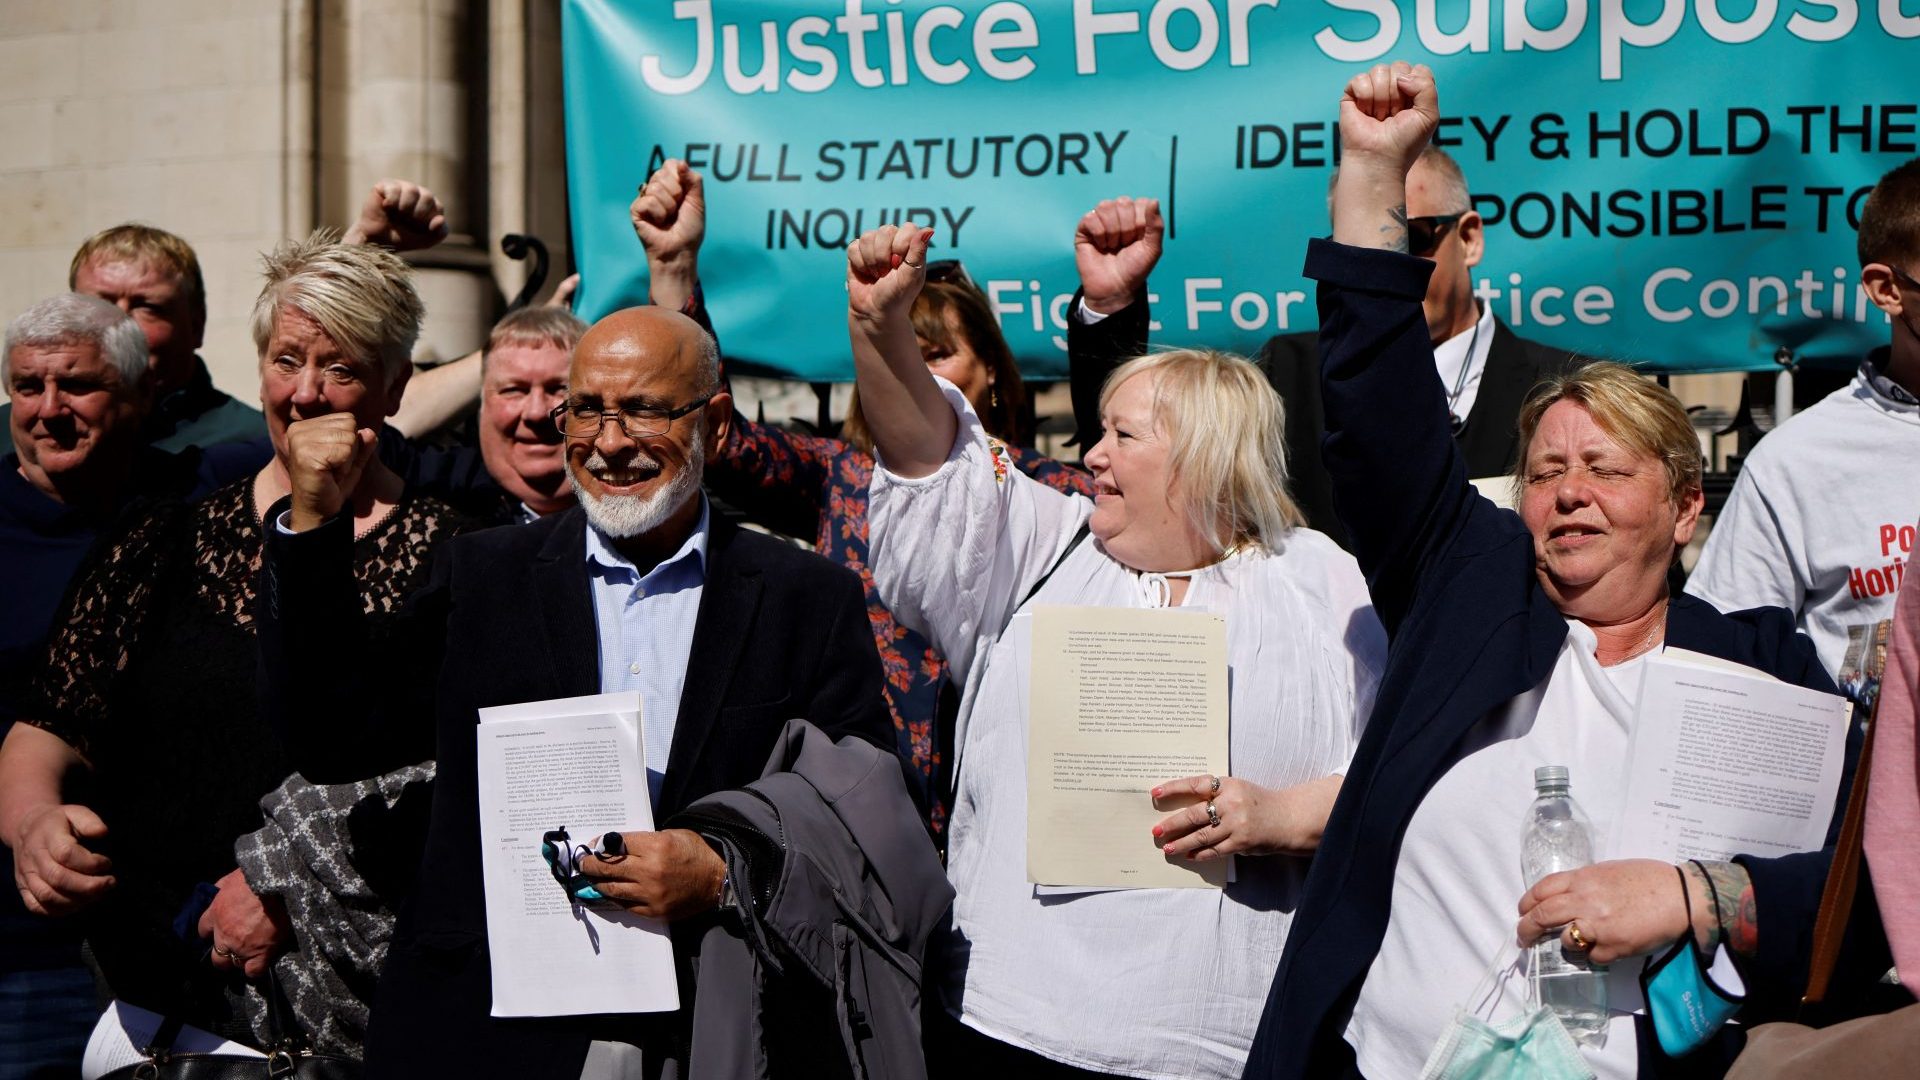 Former subpostmasters celebrate outside the Royal Courts of Justice in London, on April 23, 2021, following a court ruling clearing subpostmasters of convictions for theft and false accounting. Photo: TOLGA AKMEN/AFP via Getty Images